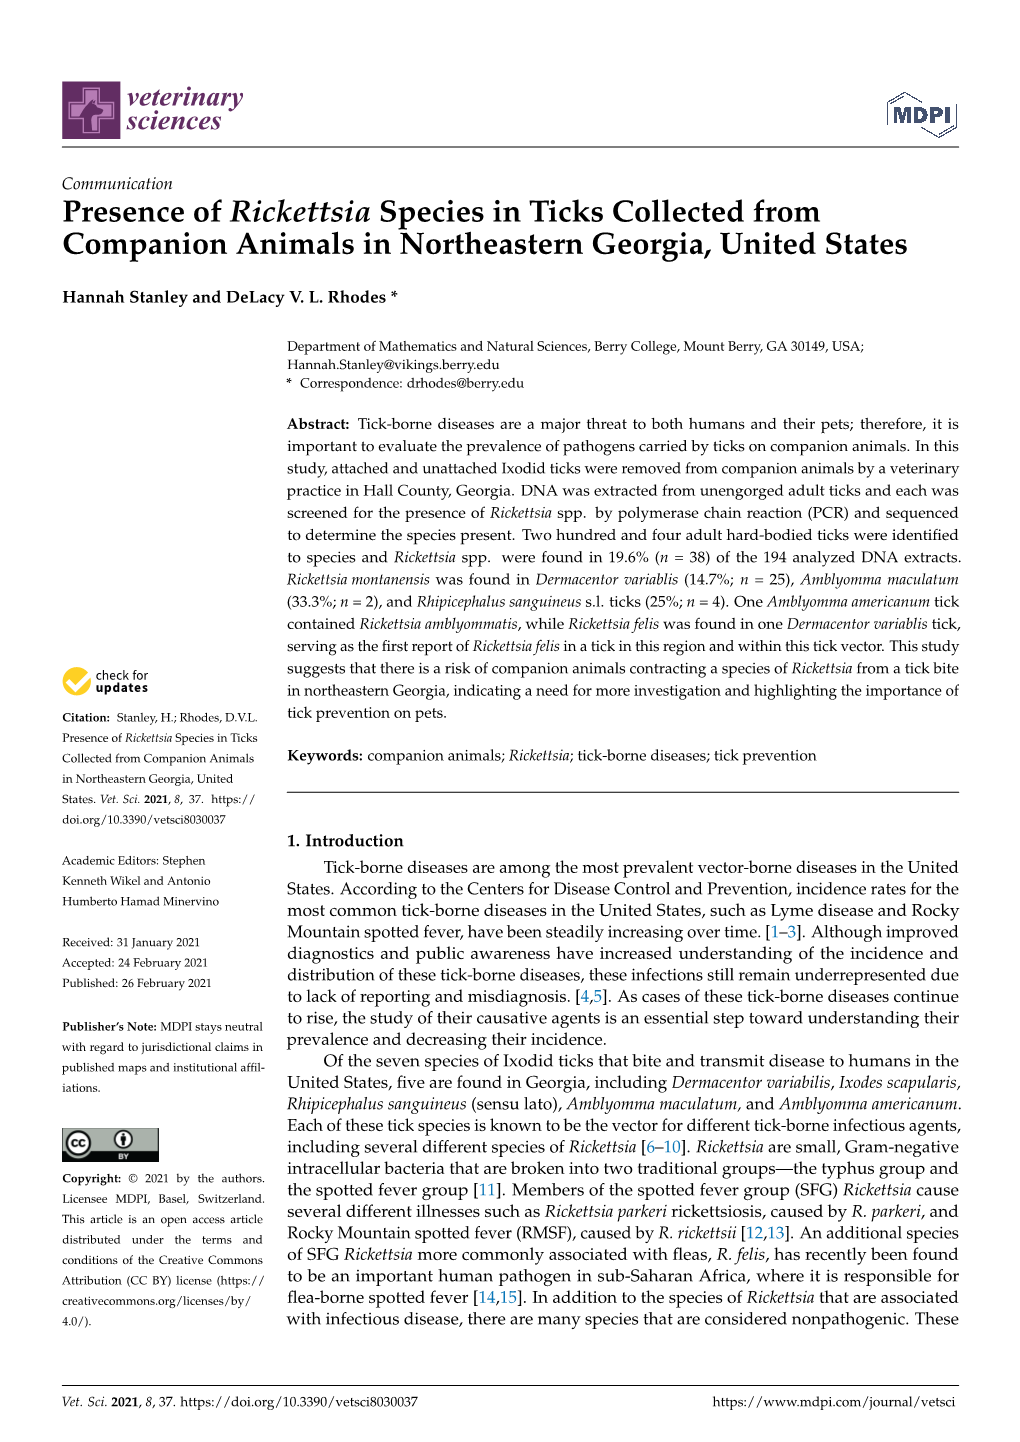 Presence of Rickettsia Species in Ticks Collected from Companion Animals in Northeastern Georgia, United States